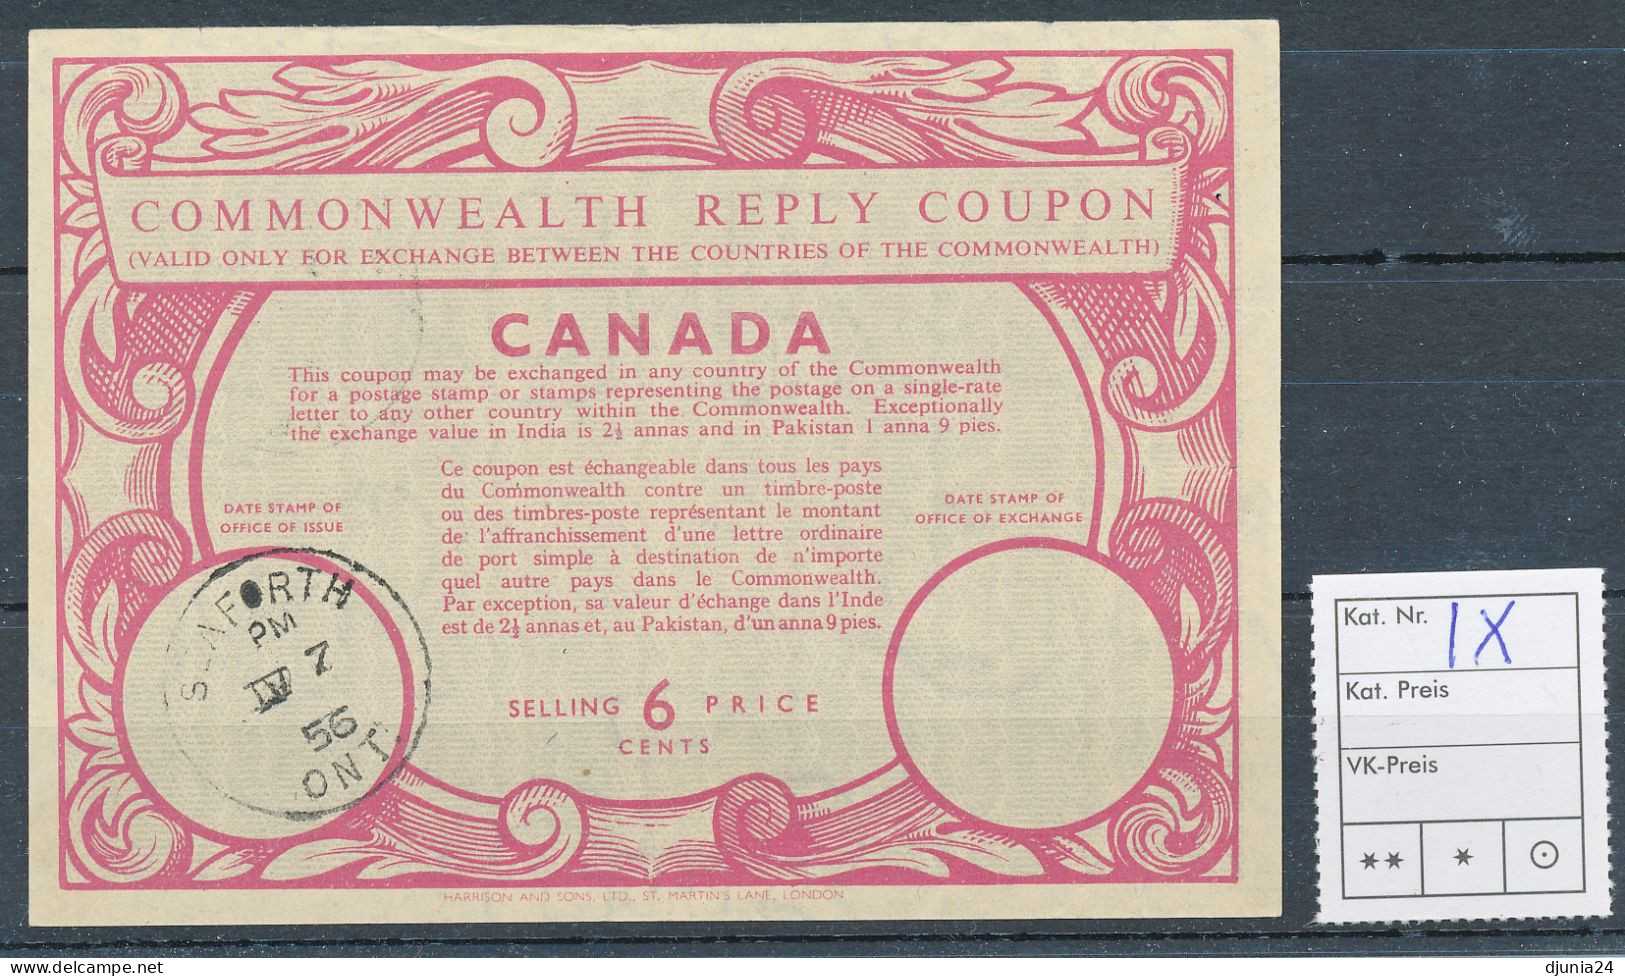 BF0363 / CANADA / KANADA - collection of 22 different reply coupon reponse